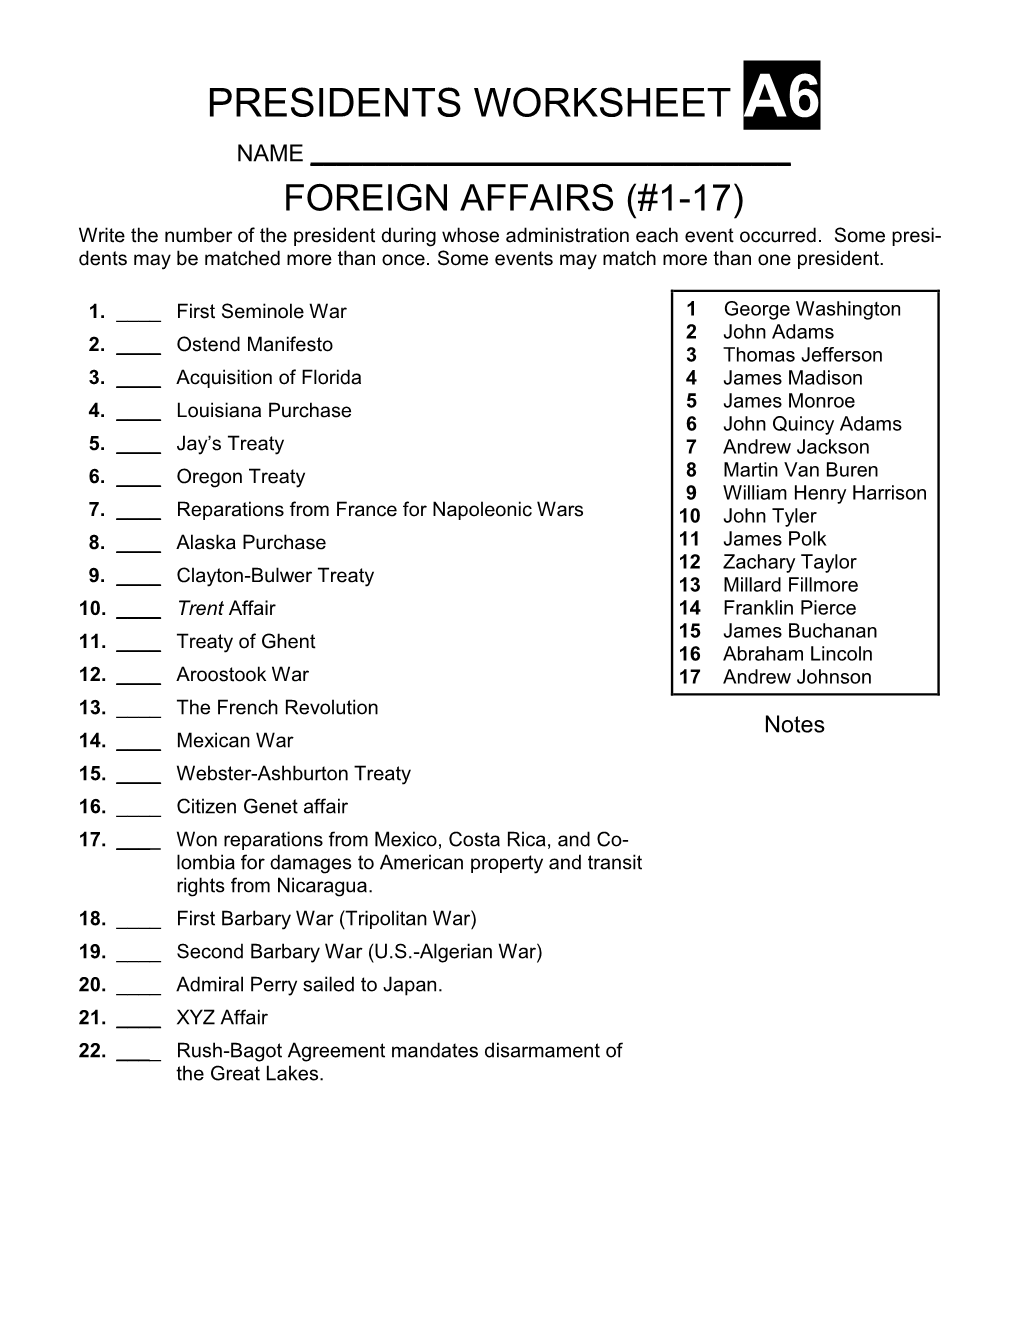 PRESIDENTS WORKSHEET A6 NAME ______FOREIGN AFFAIRS (#1-17) Write the Number of the President During Whose Administration Each Event Occurred